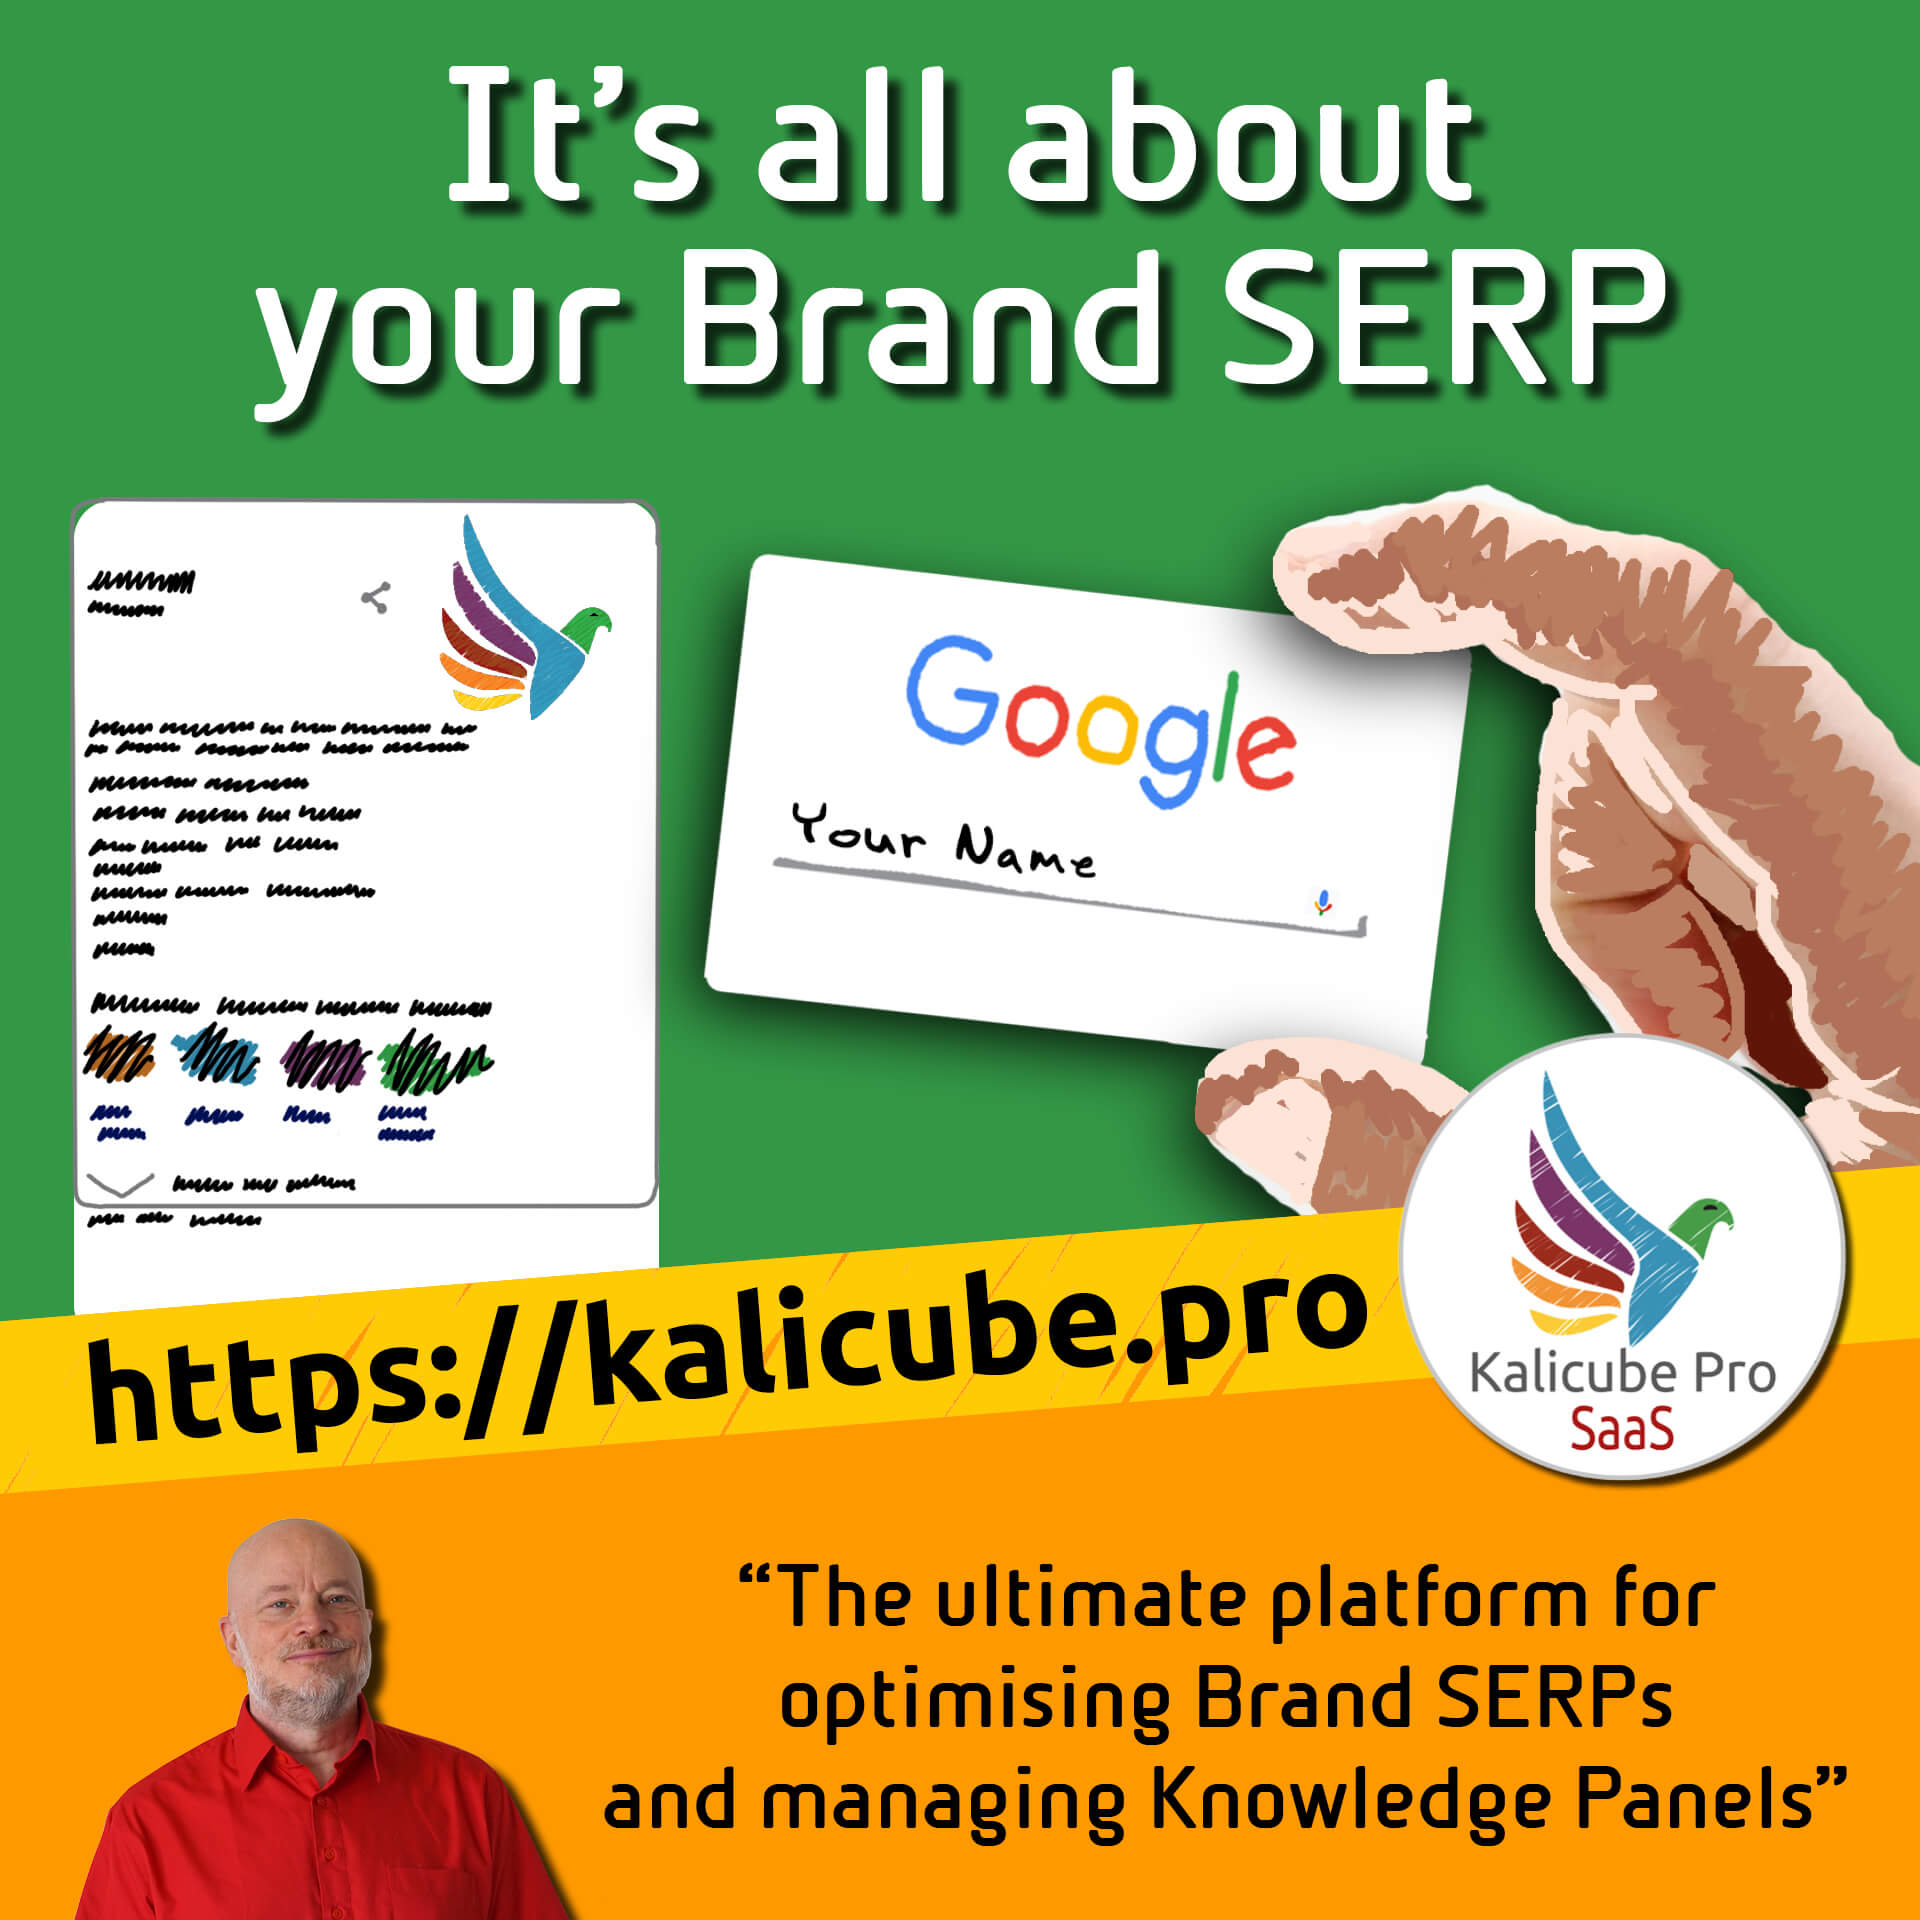 Kalicube Pro - the ultimate platform for optimising Brand SERPs and managing Knowledge Panels